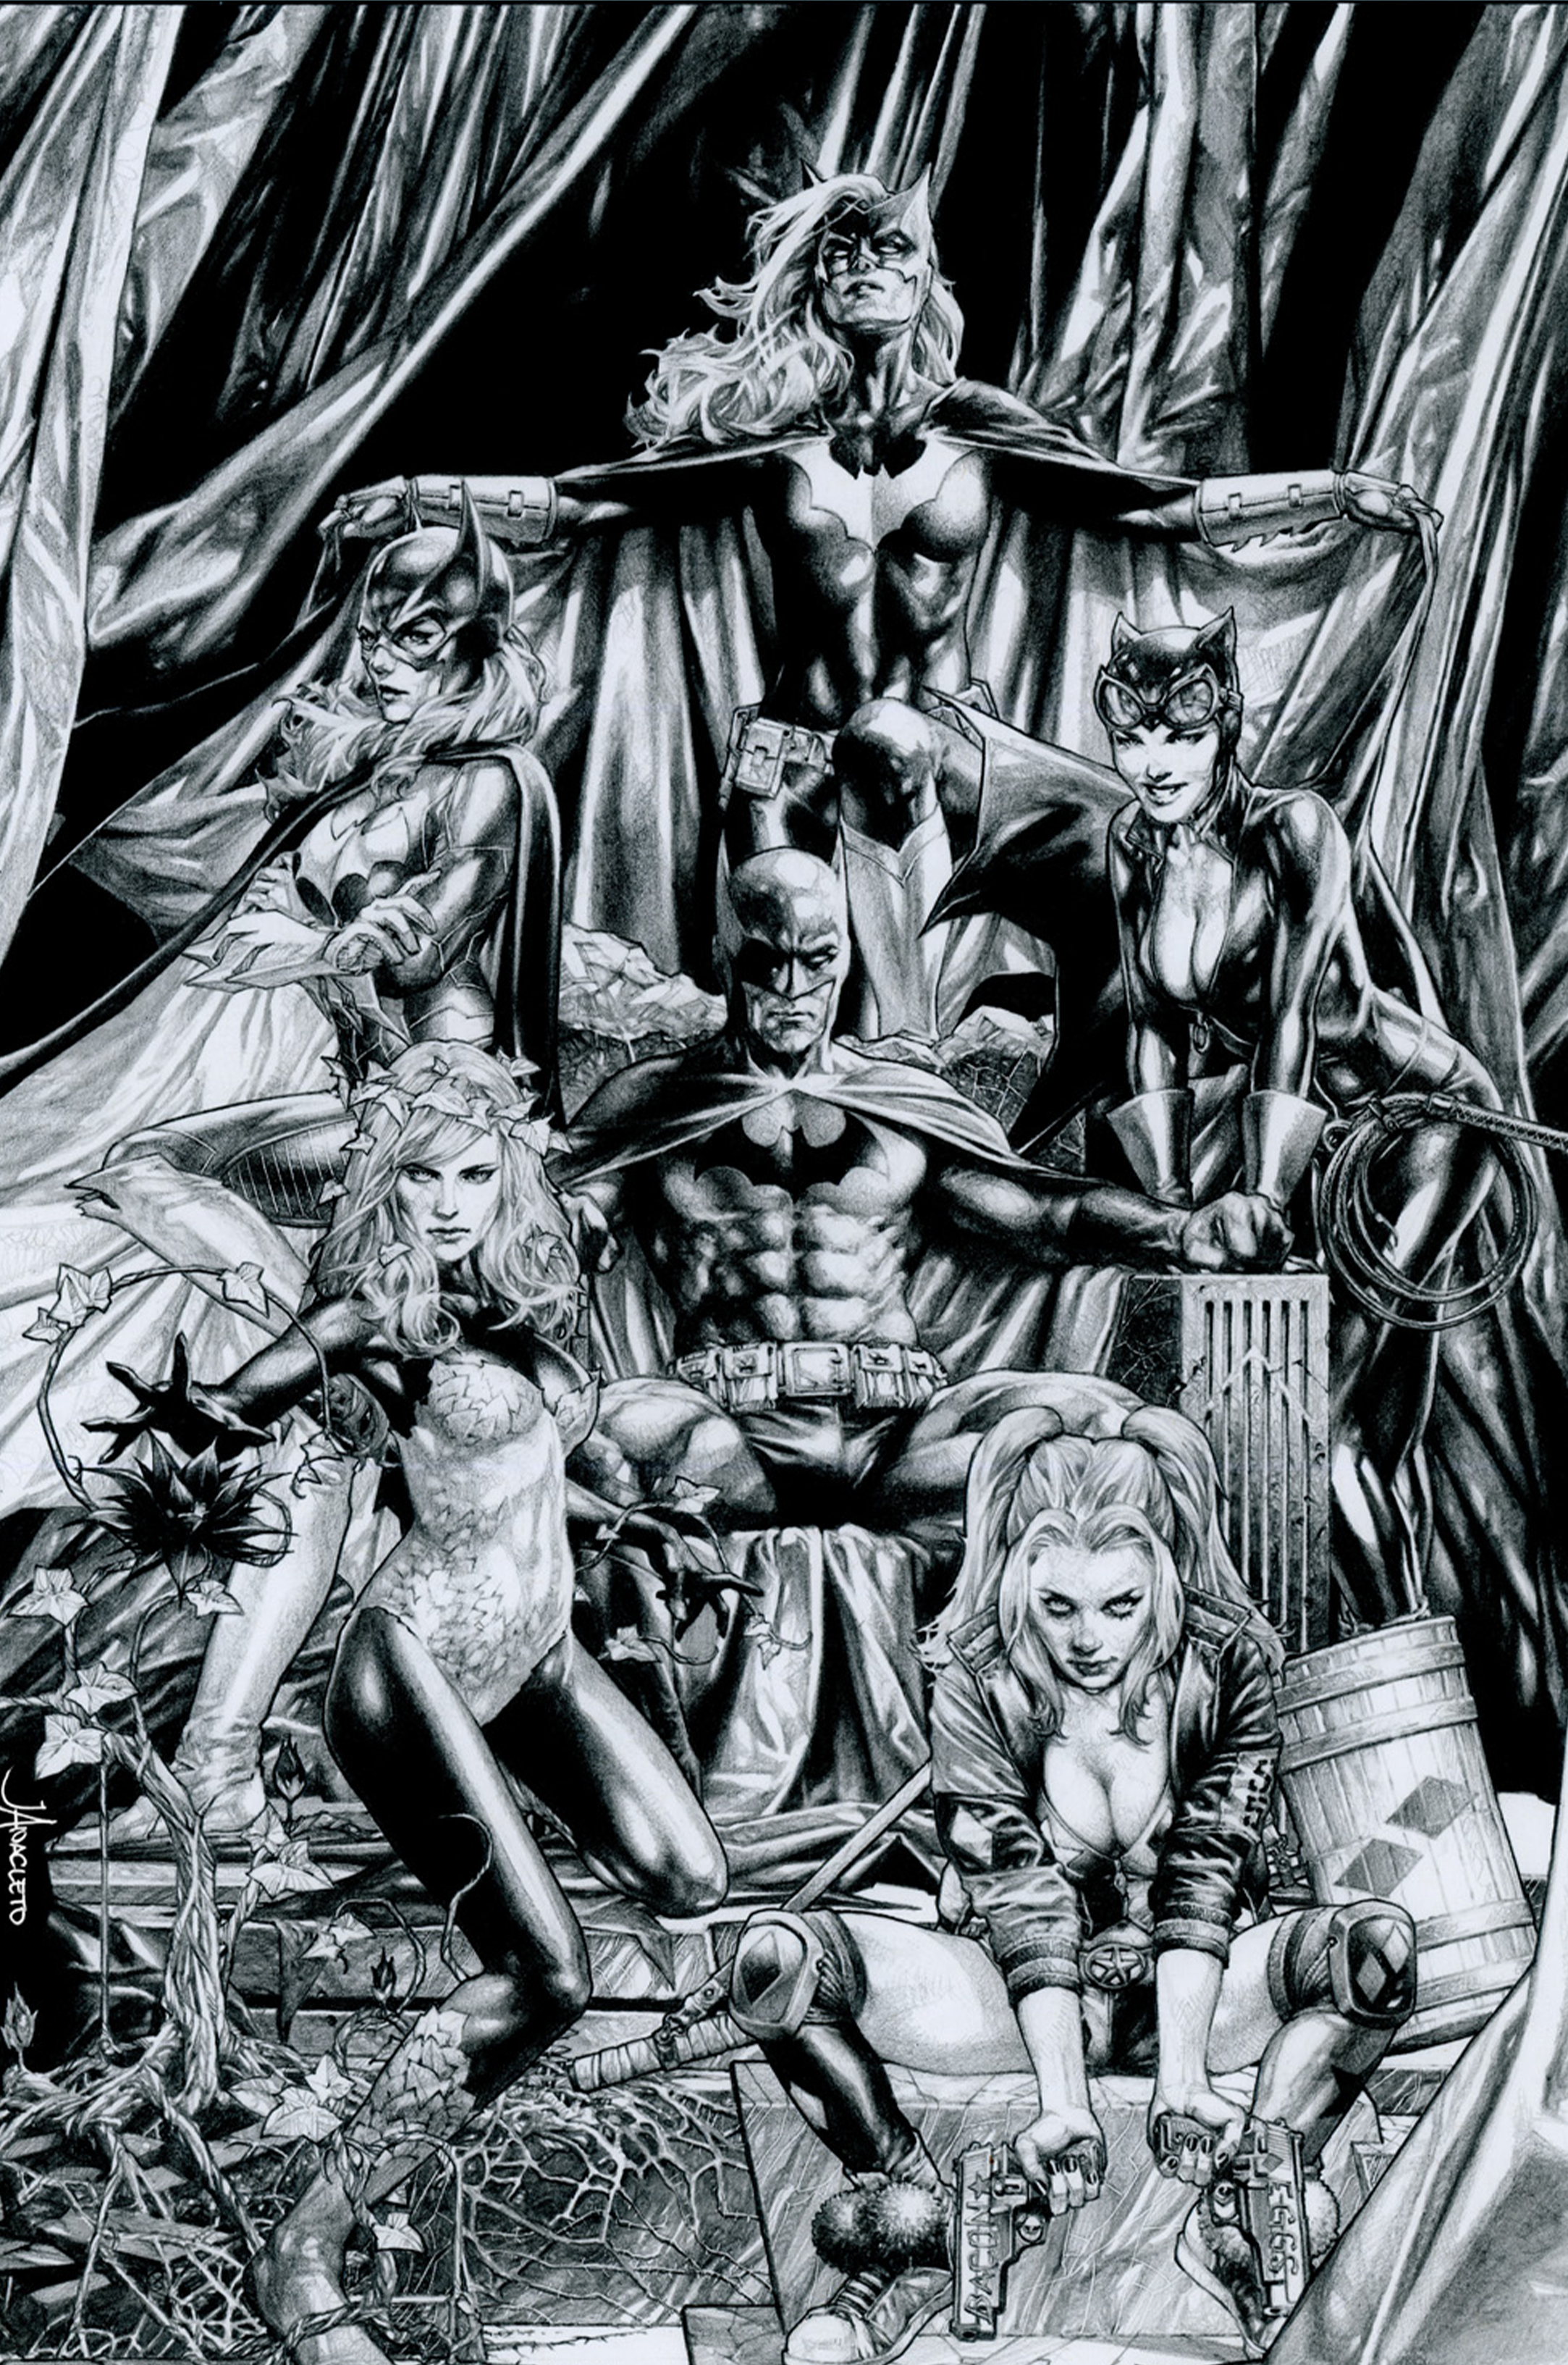 DETECTIVE COMICS #1000 UNKNOWN COMIC BOOKS JAY ANACLETO EXCLUSIVE 2 PACK 3/27/2019